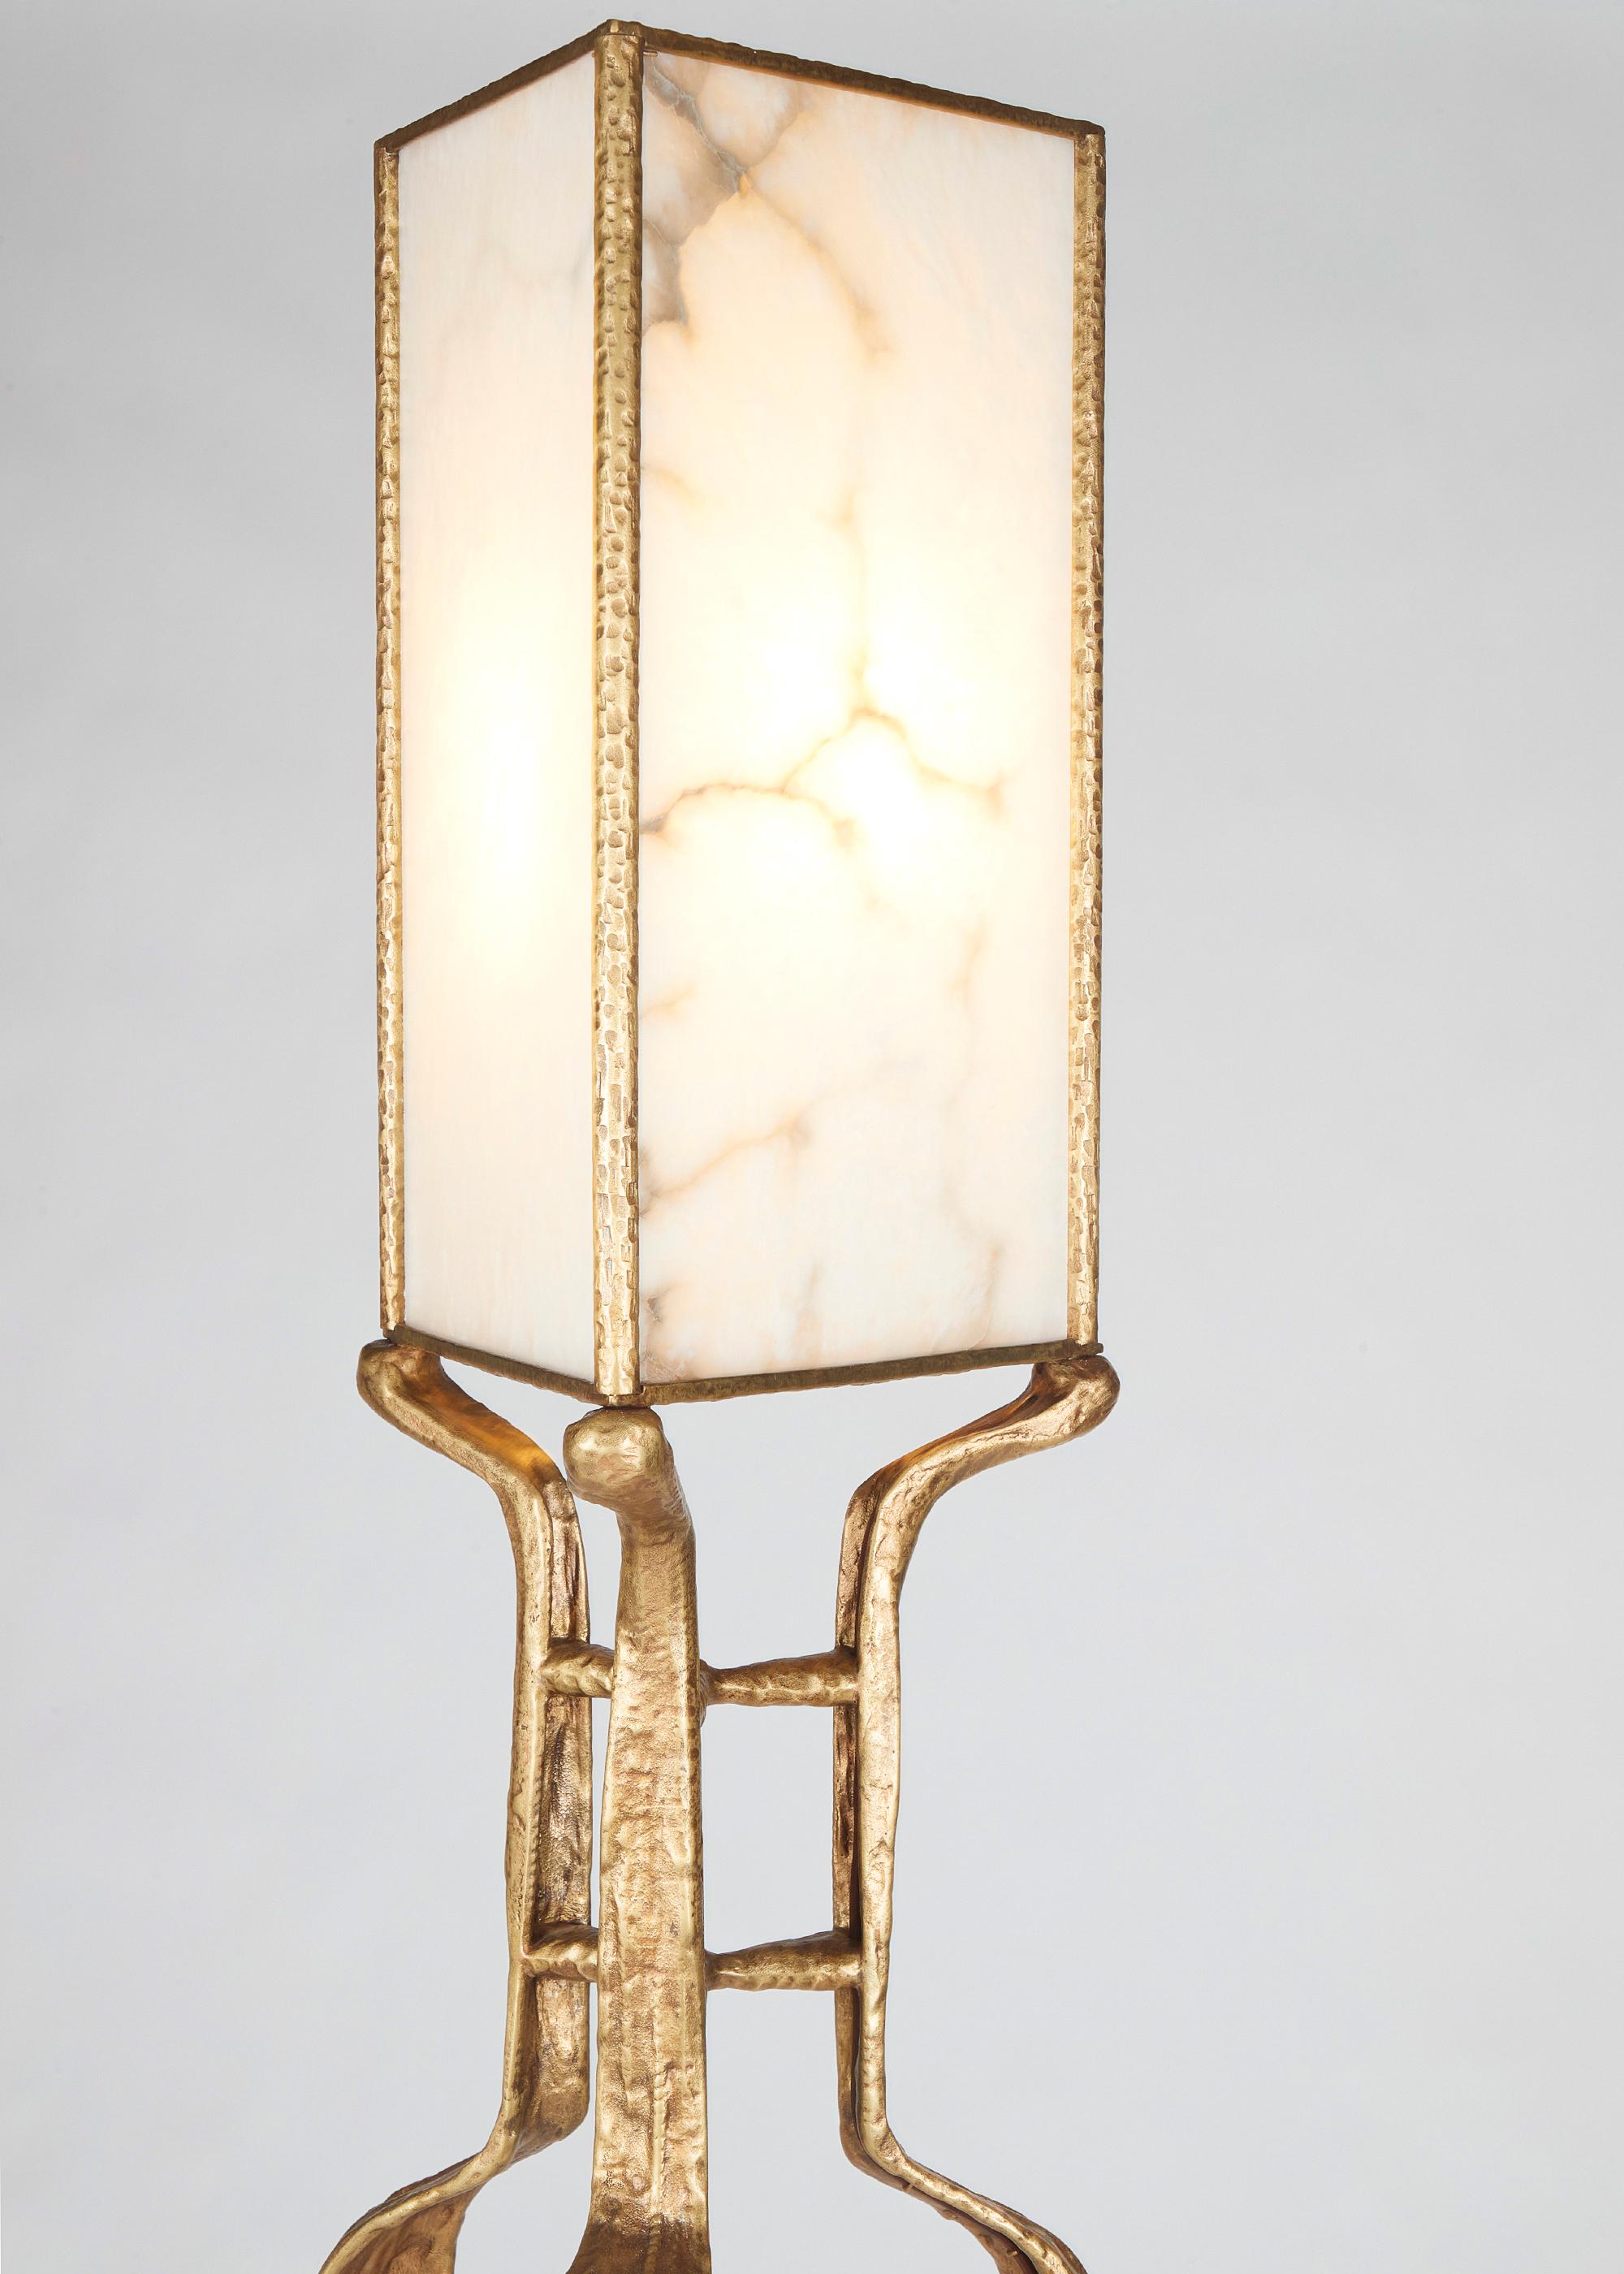 French Franck Evennou, Contemporary Bronze and Alabaster Floor Lamp, France, 2020 For Sale